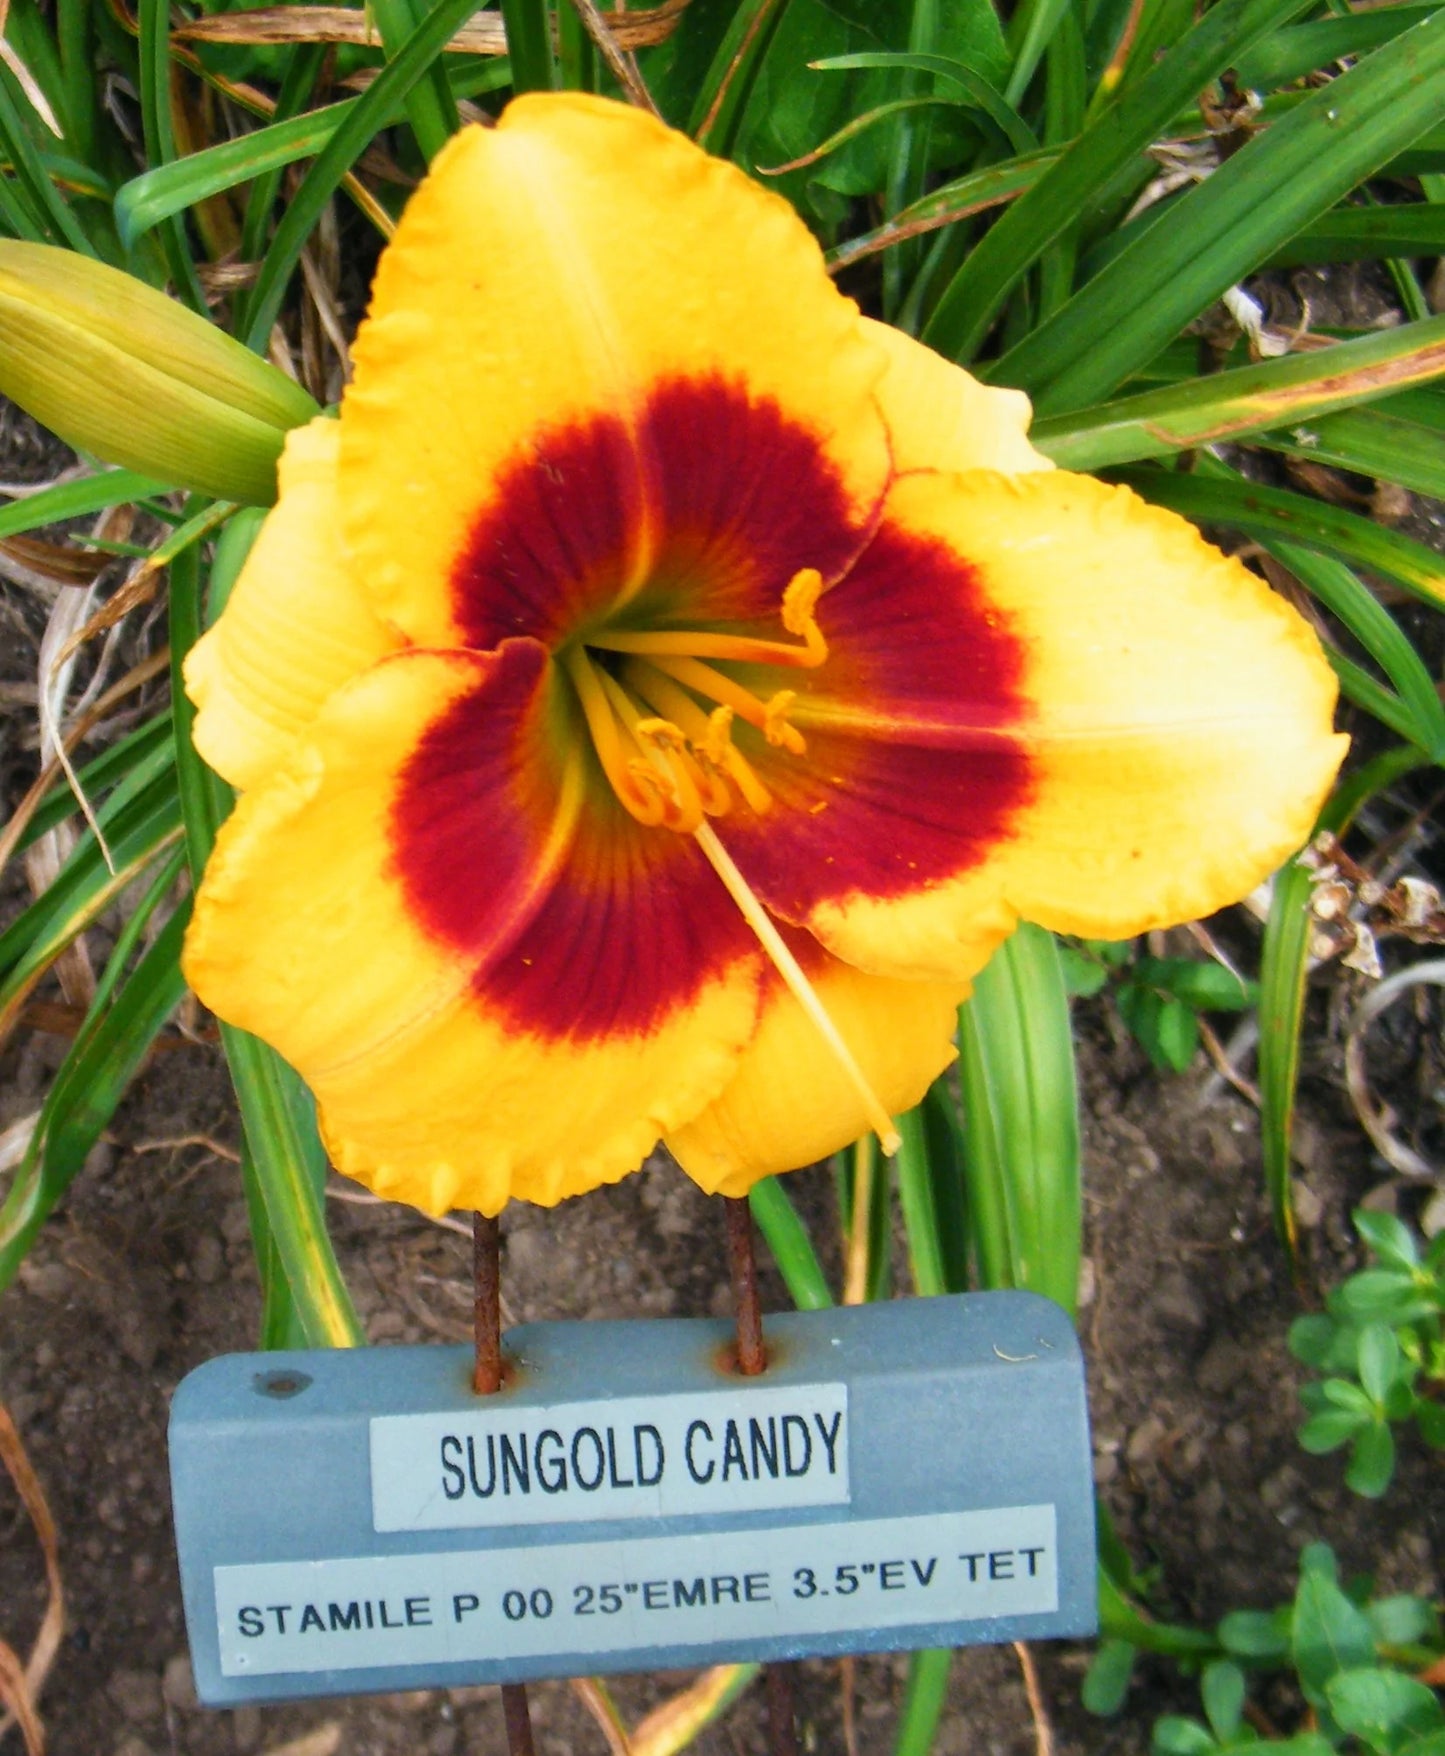 SUNGOLD CANDY